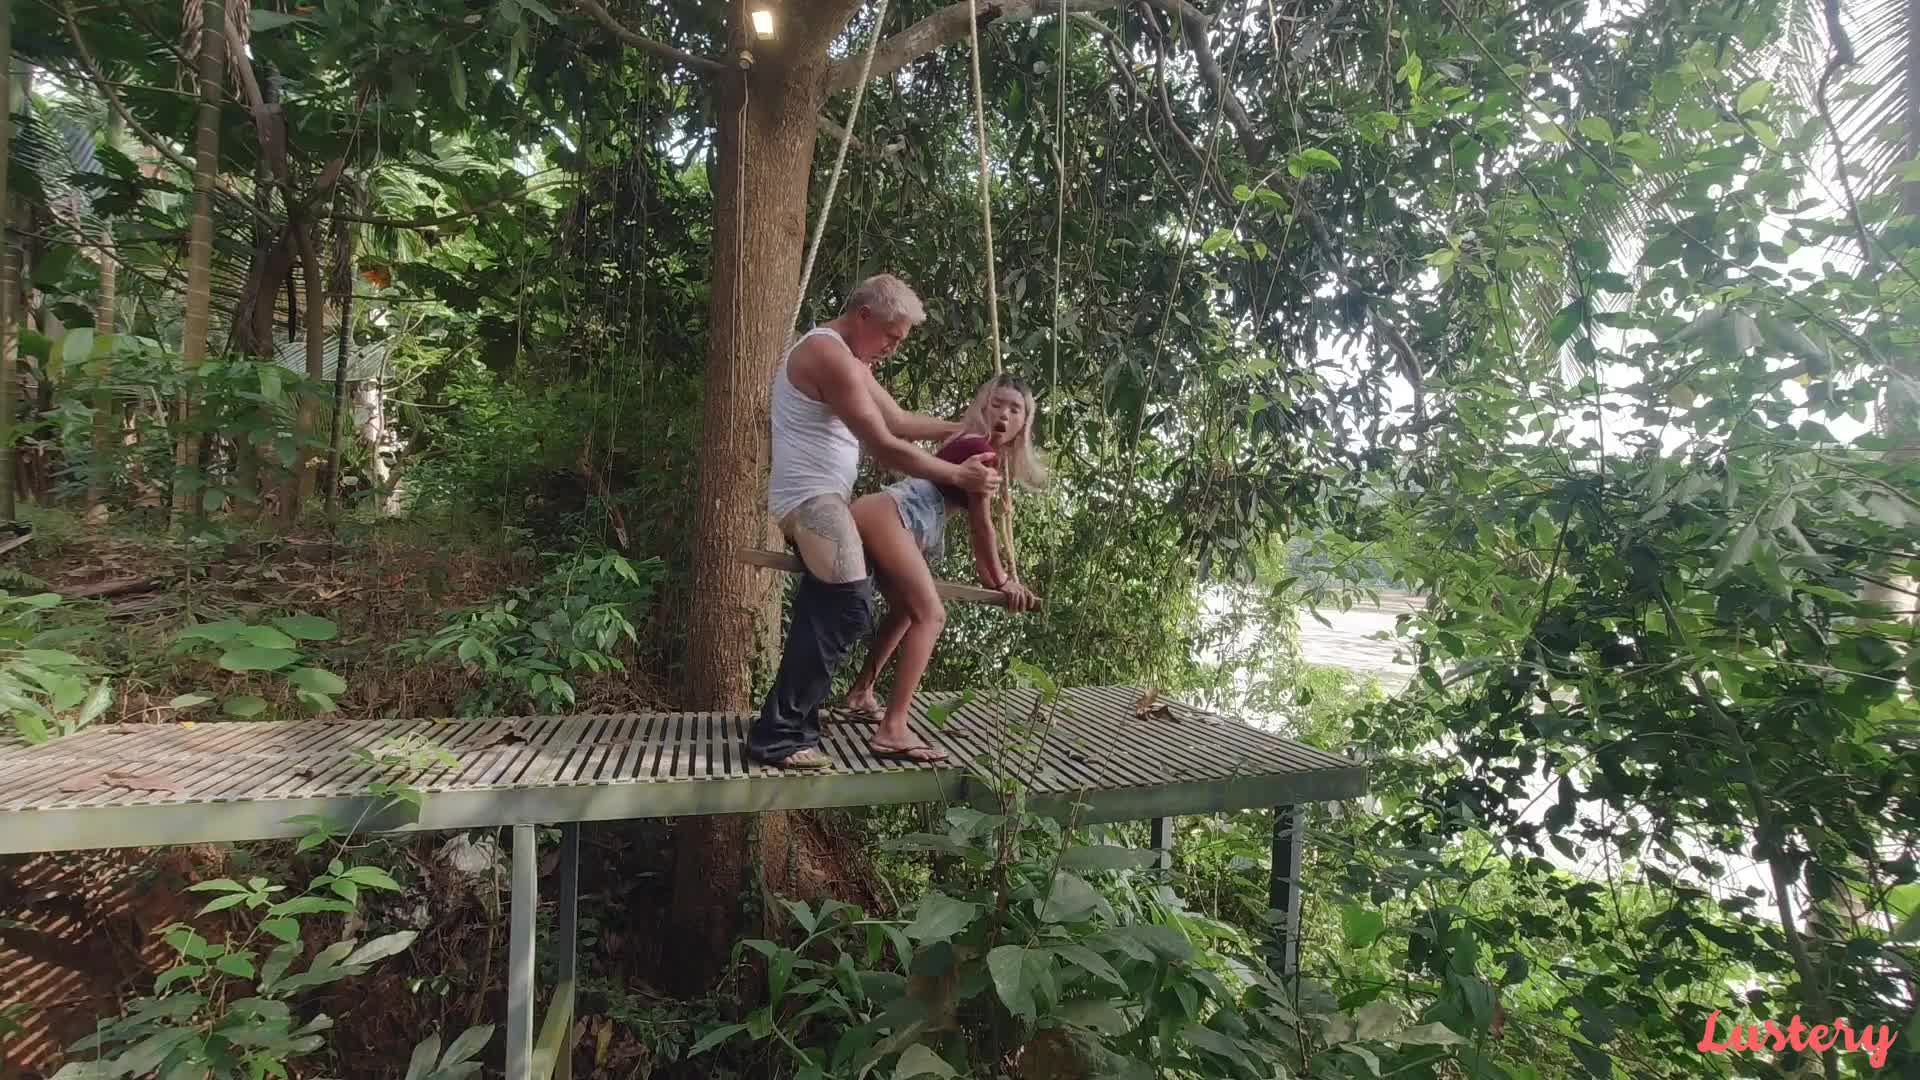 Lustery Cinnamon & Spice Outdoor Anal On A Swing By The River